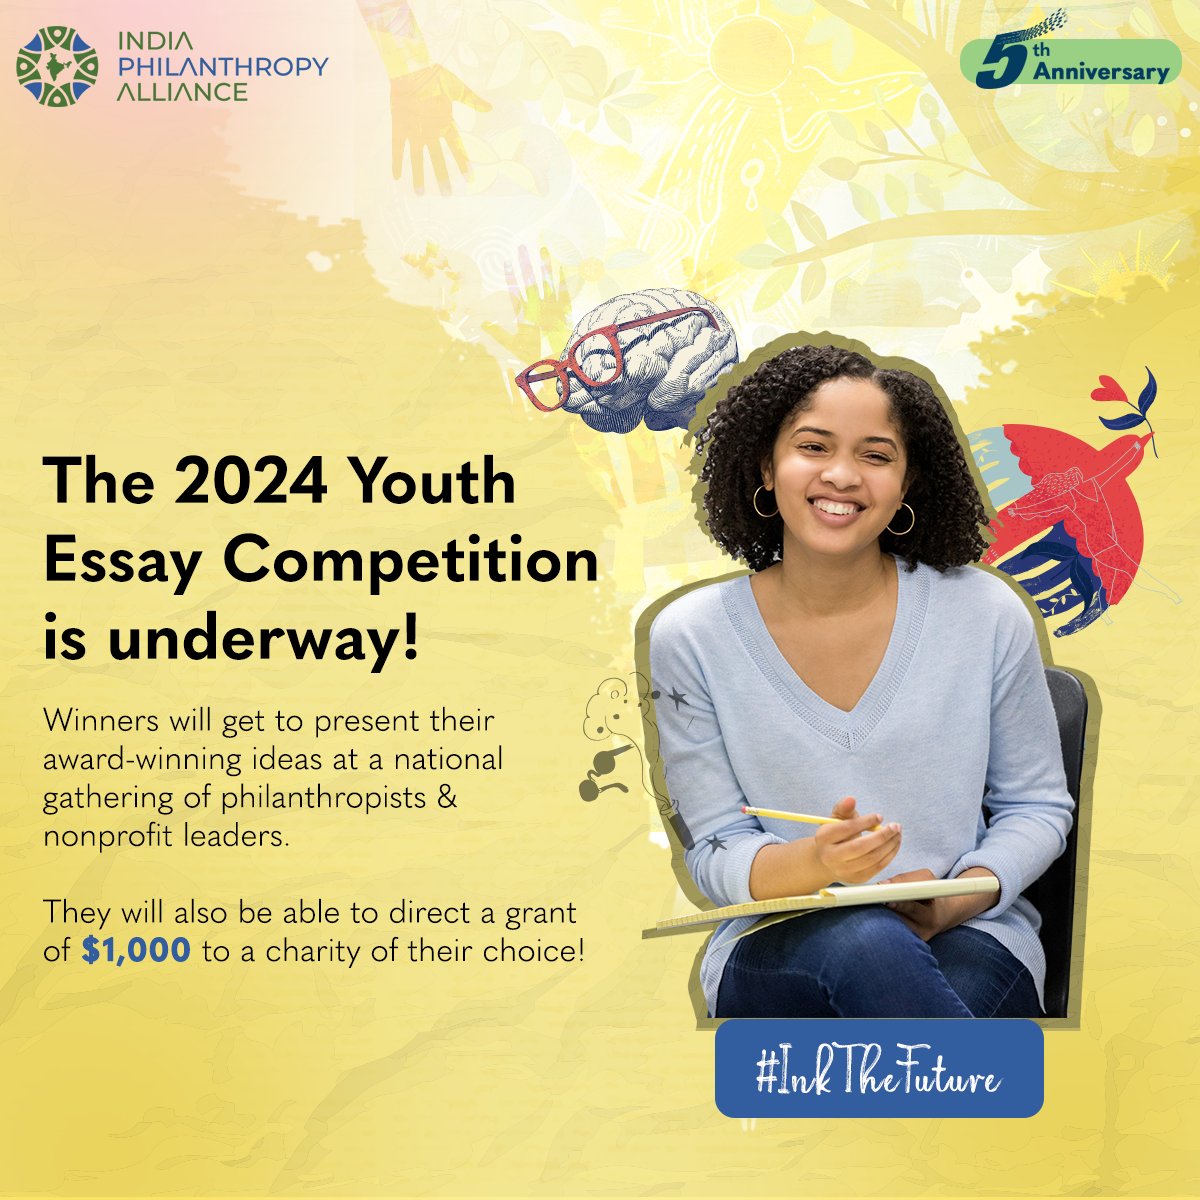 Write about the future you want to see! Winners of 2024 Youth #EssayCompetition will gain unique opportunities & exposure to the philanthropic movement towards India & will get to present their ideas for development & change. ​ #InkTheFuture​ Learn more: indiaphilanthropyalliance.org/2024youthessay